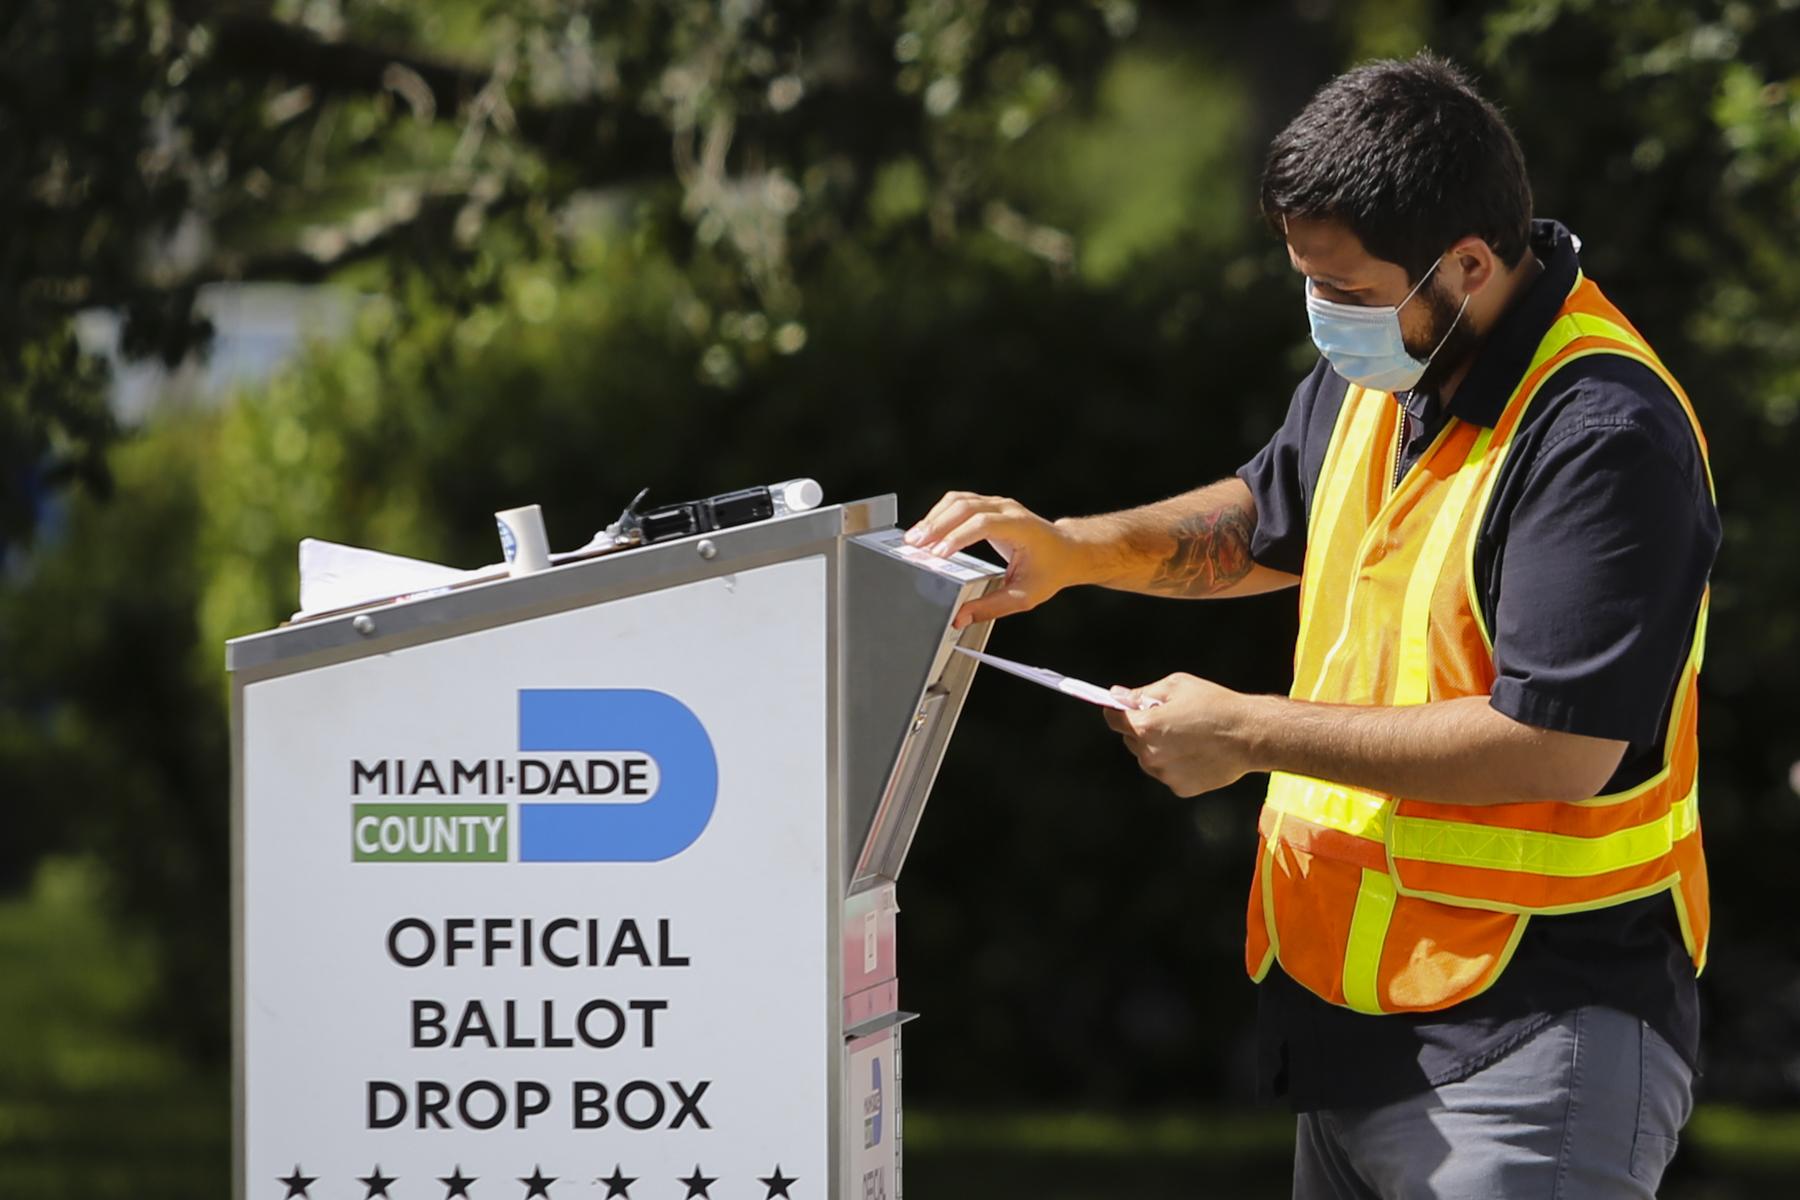 Election 2020 @ Miami, FL - A poll worker drops off a vote-by-mail ballot at a Ballot...